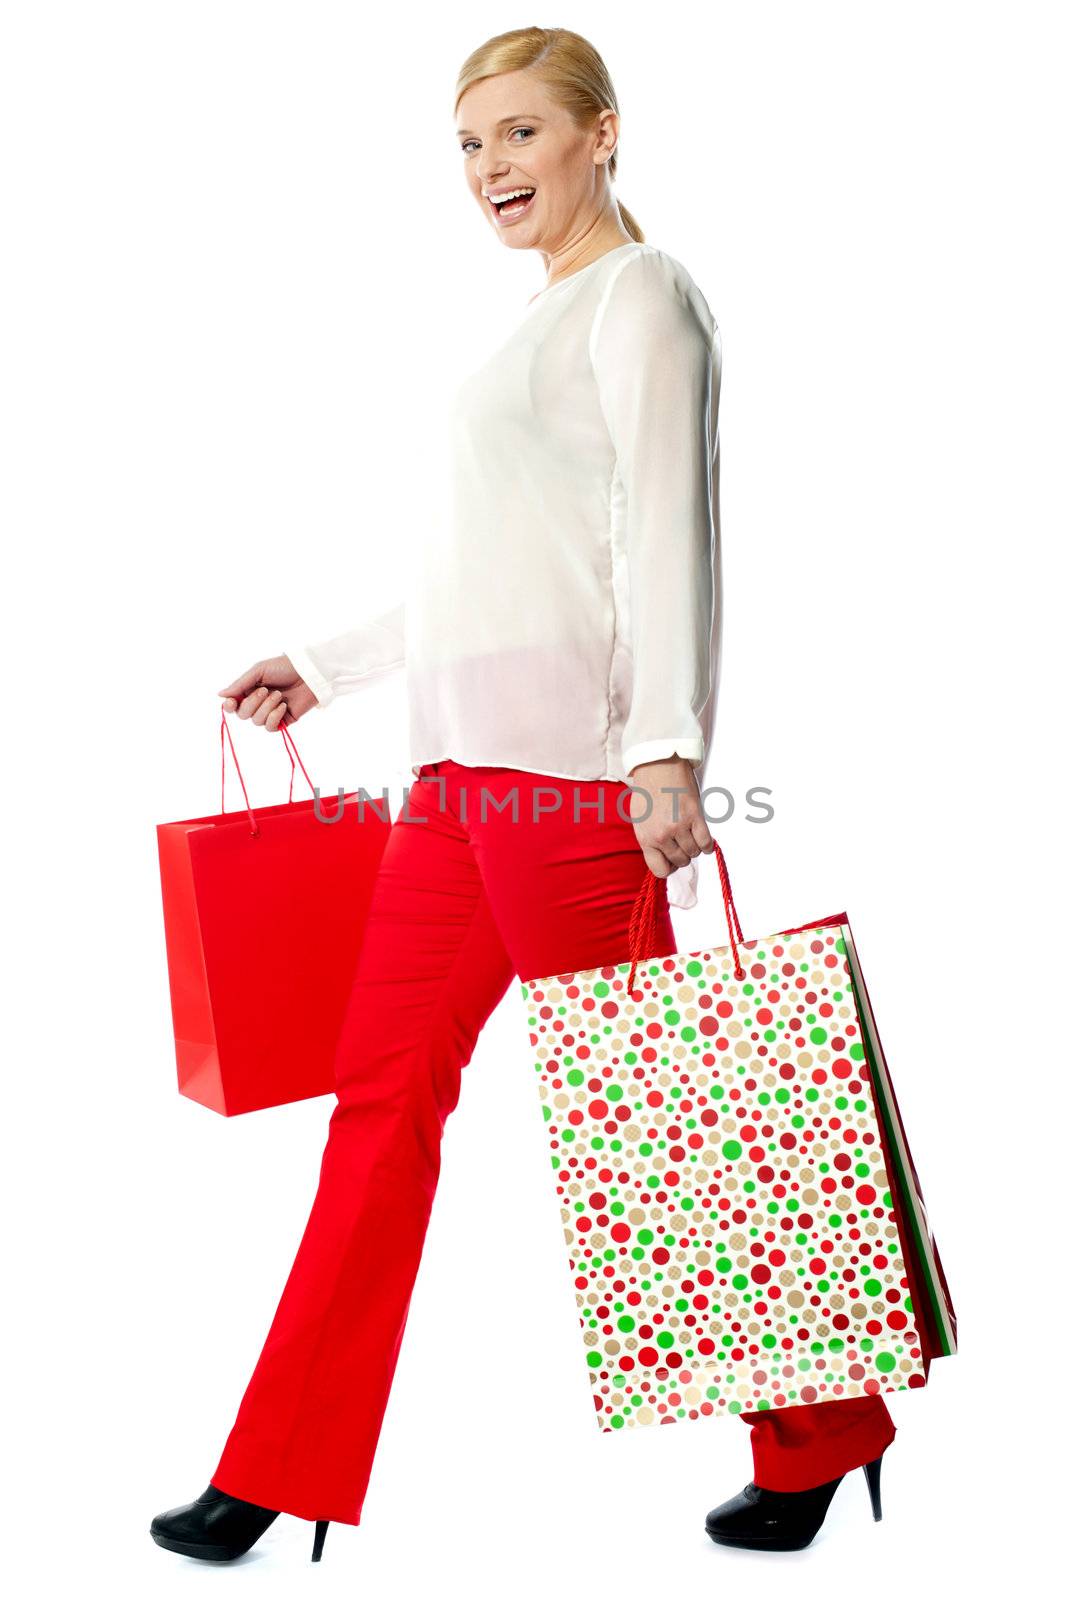 Pretty woman with shopping bags, walking by stockyimages